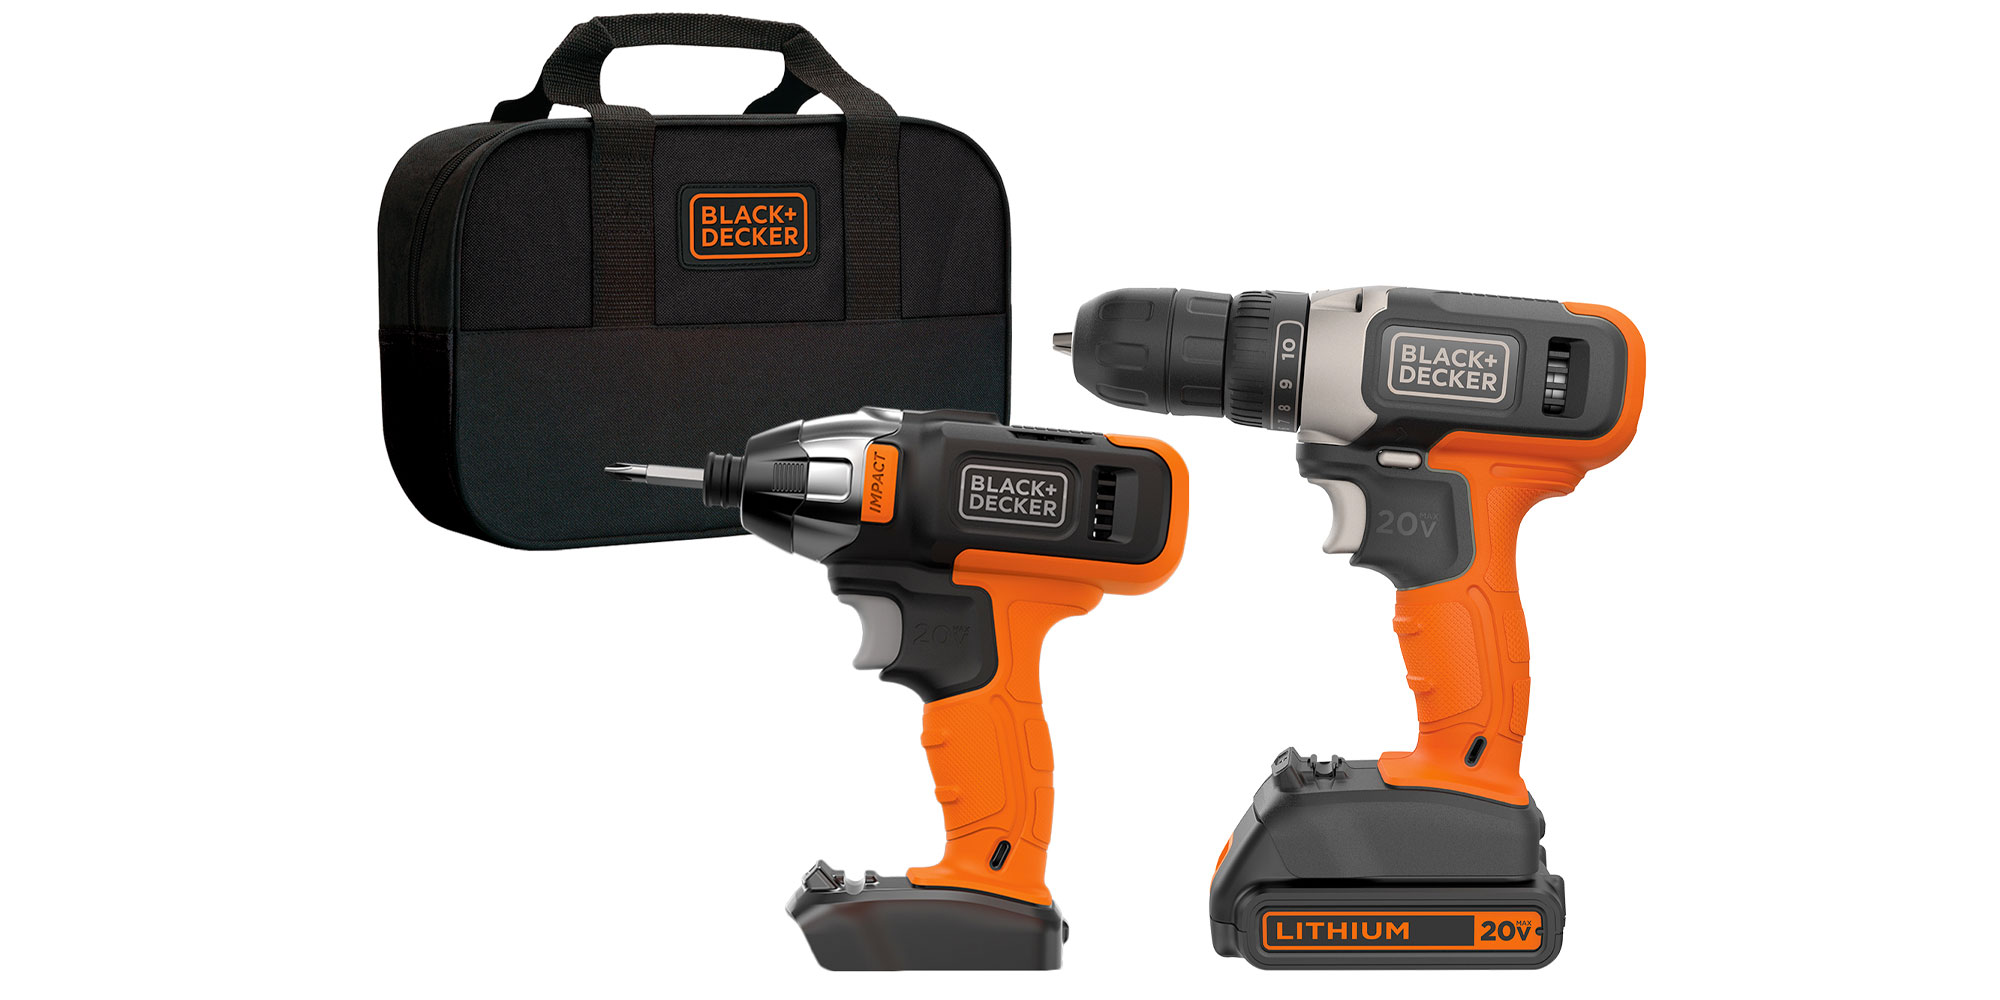 https://9to5toys.com/wp-content/uploads/sites/5/2019/12/Black-and-Decker-Drill-Driver-Set.jpg